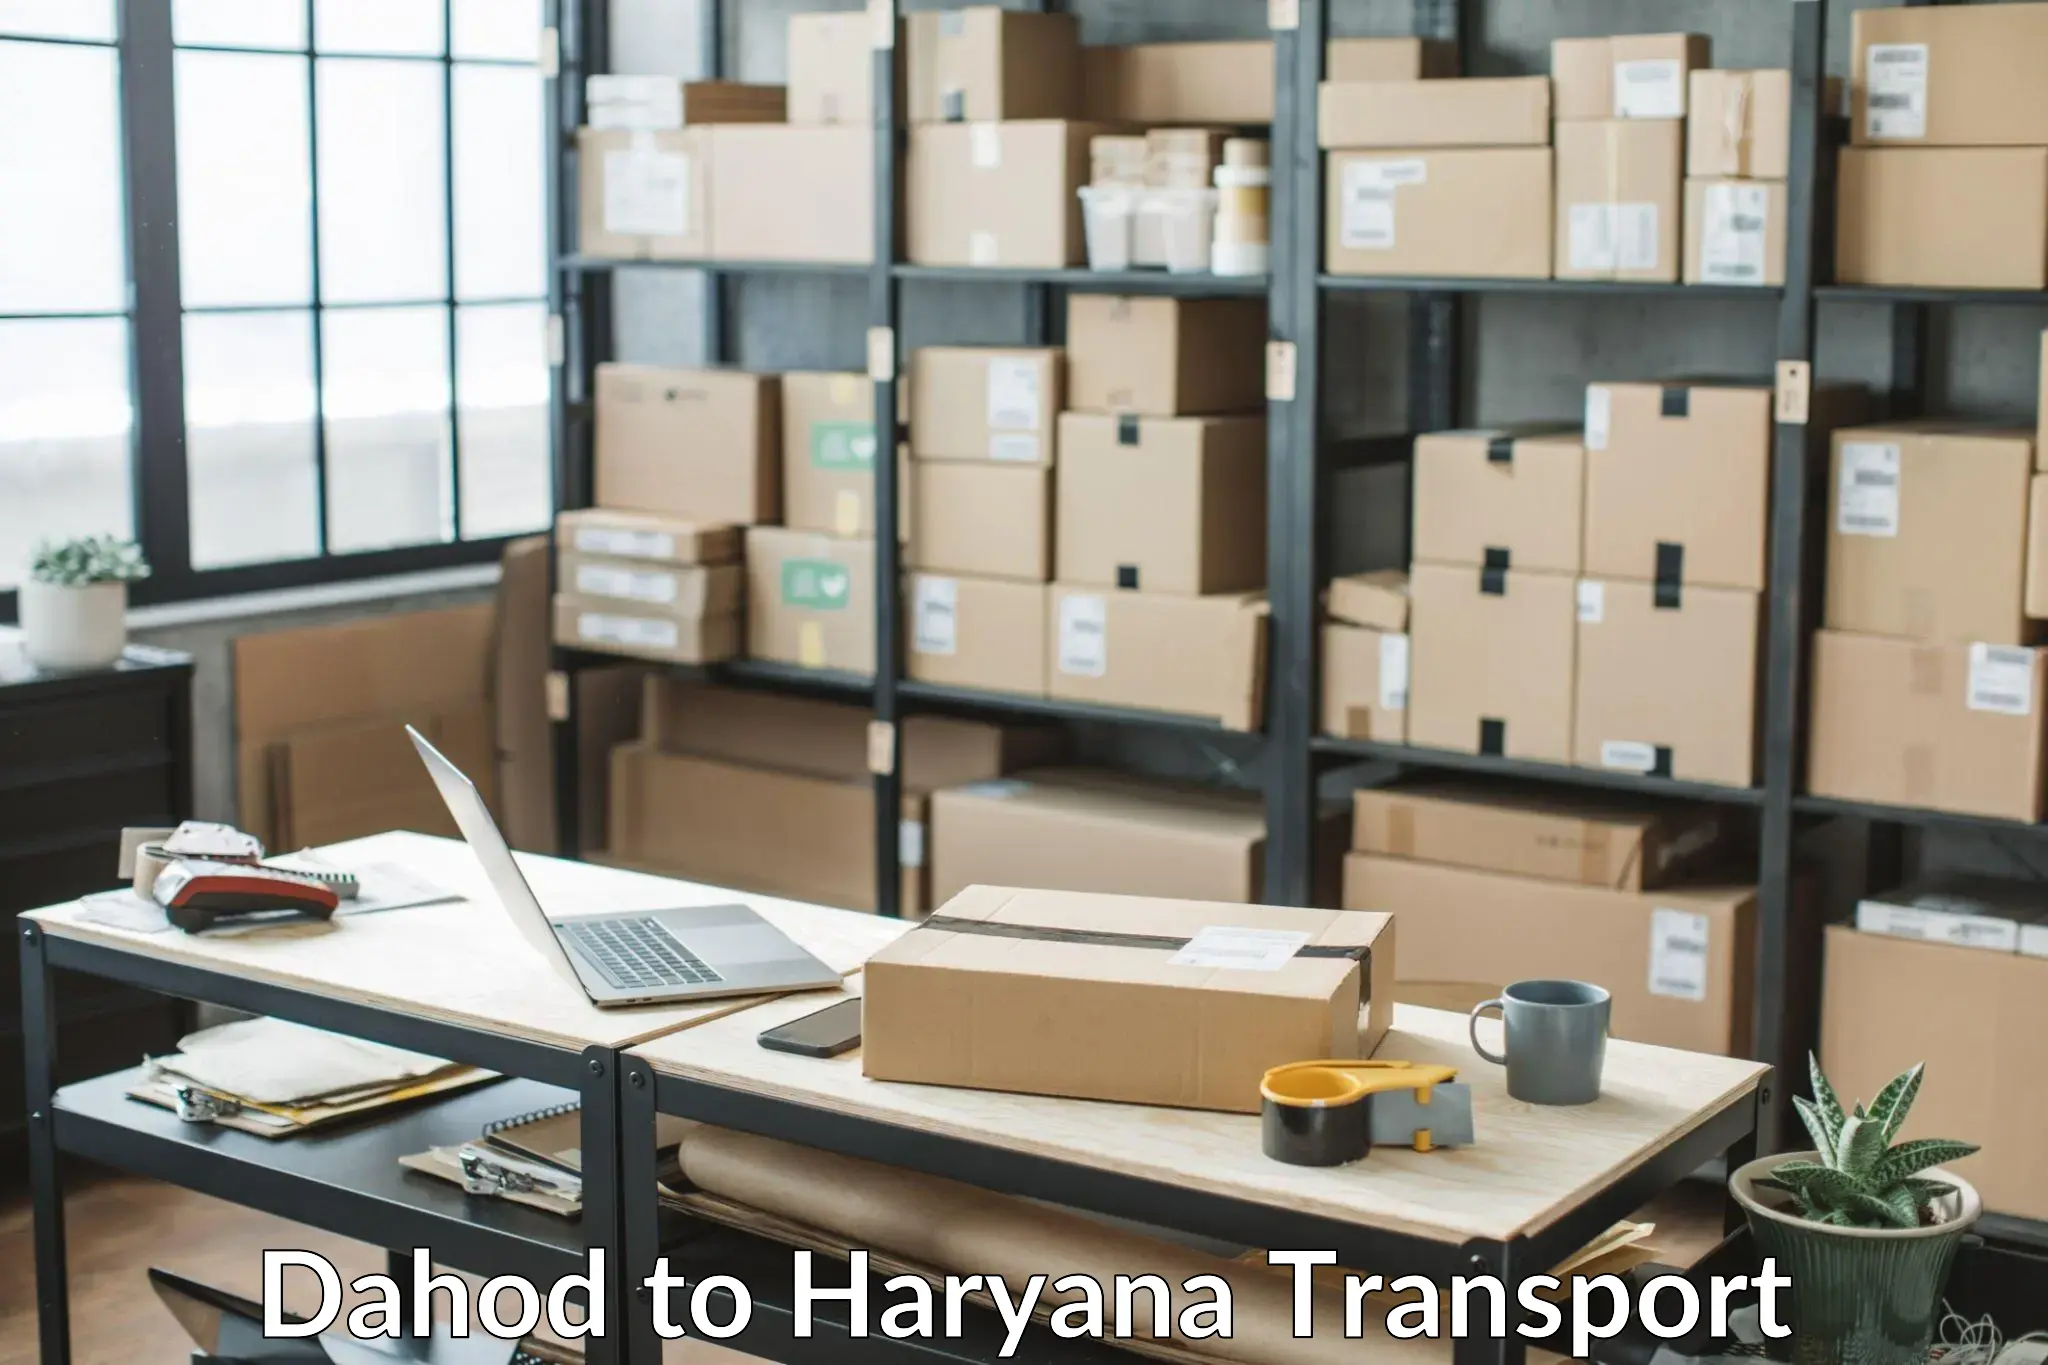 Online transport booking Dahod to Chaudhary Charan Singh Haryana Agricultural University Hisar